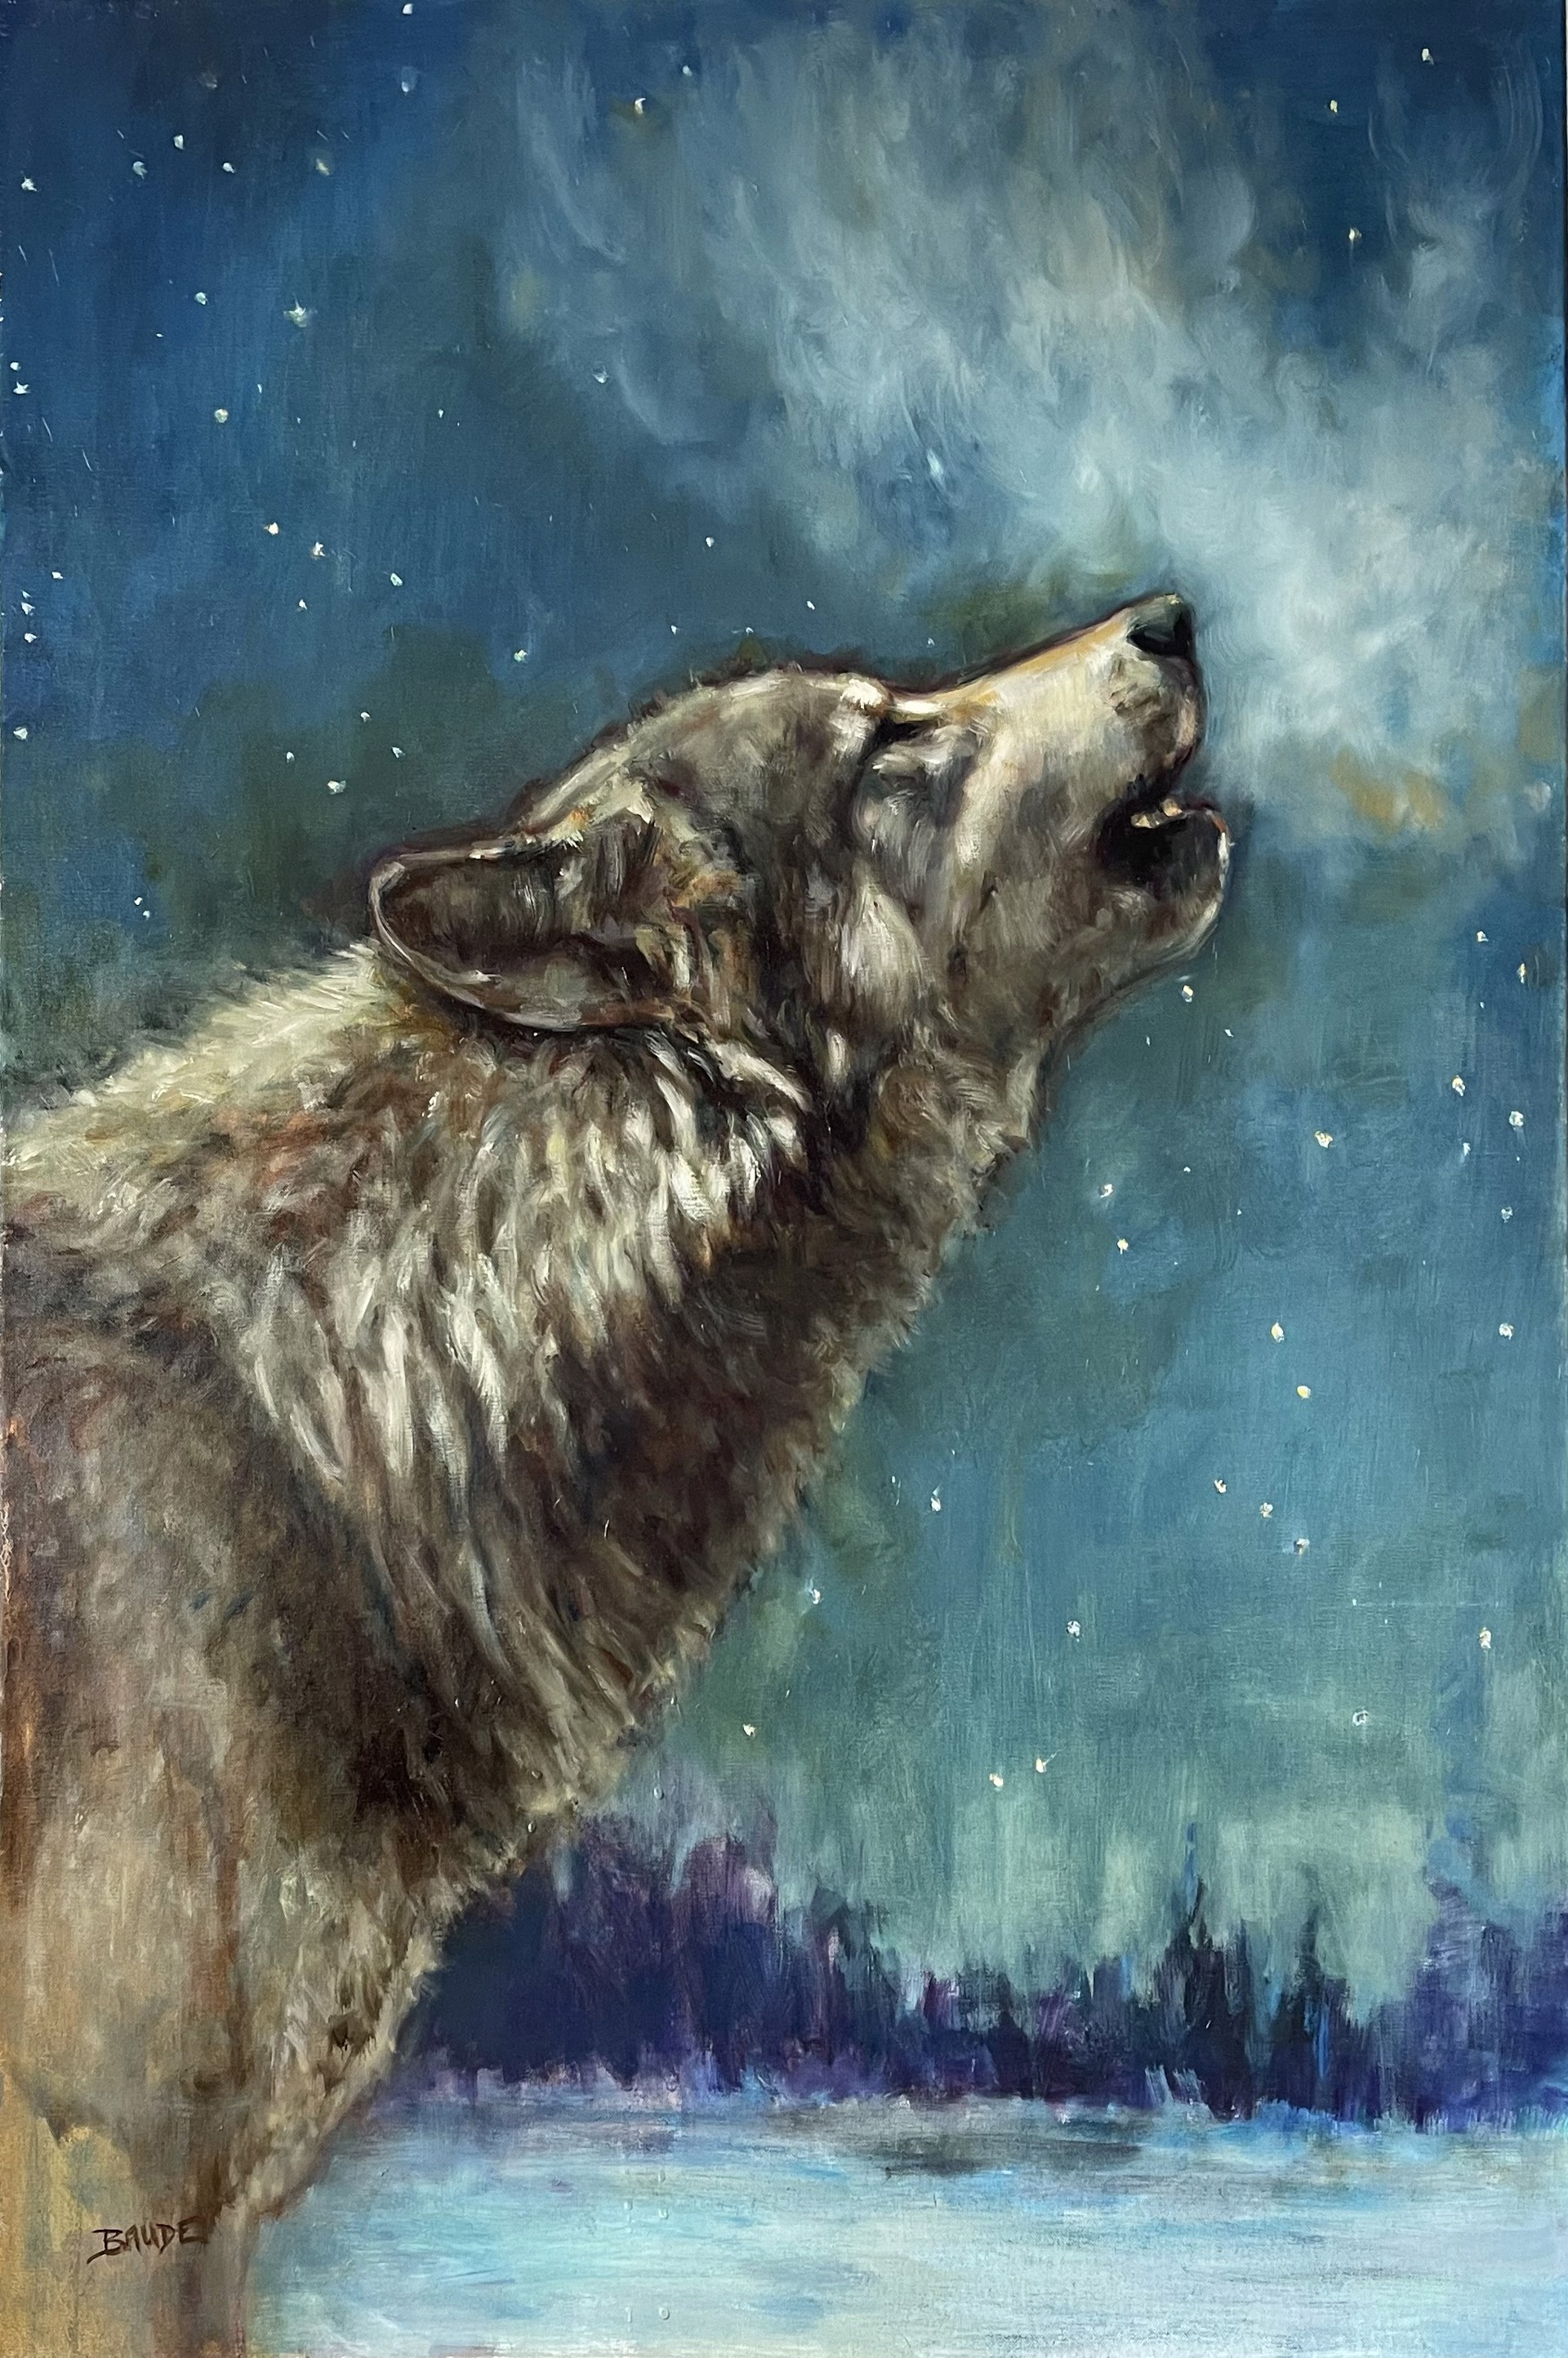 NEVER CRY WOLF by Virginie Baude